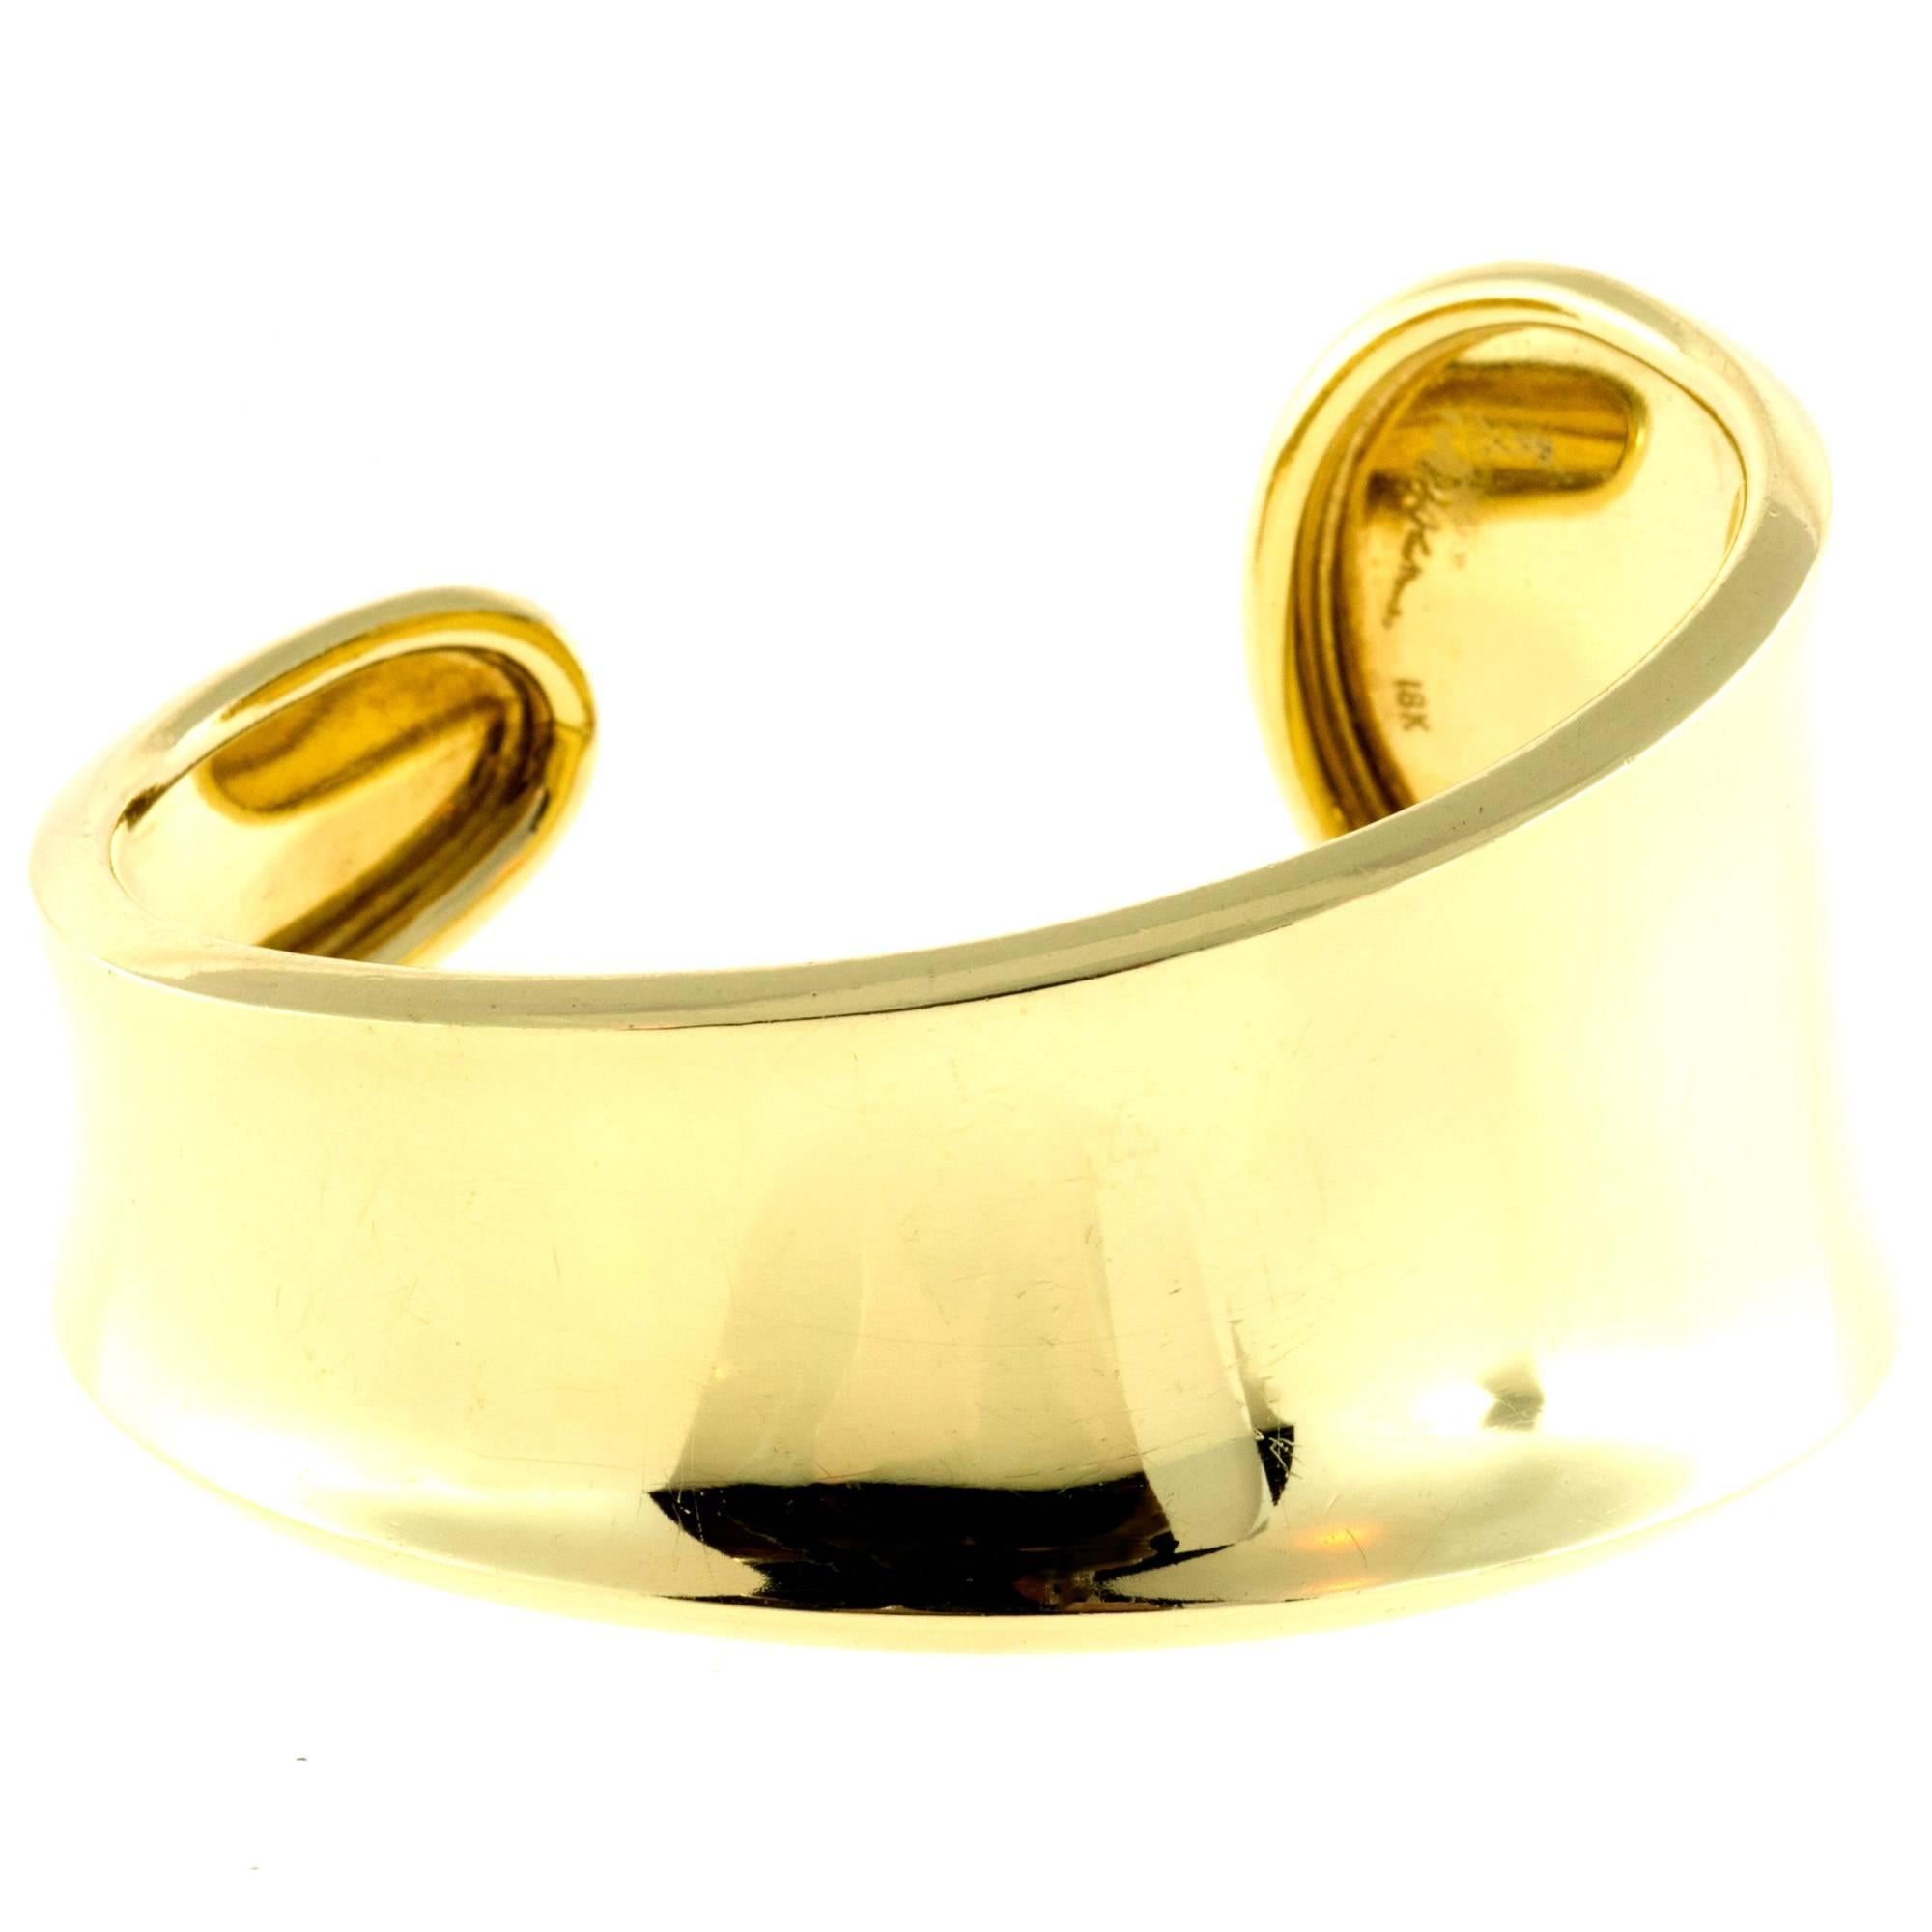 Handmade Robert Lee Morris solid 18k yellow gold rolled edge slip on cuff style bracelet with the artists’ signature. 

18k Yellow Gold
Stamped: 18k (script signature) Robert Lee Morris 
Solid 18k handmade slip on cuff rolled edges
49.0